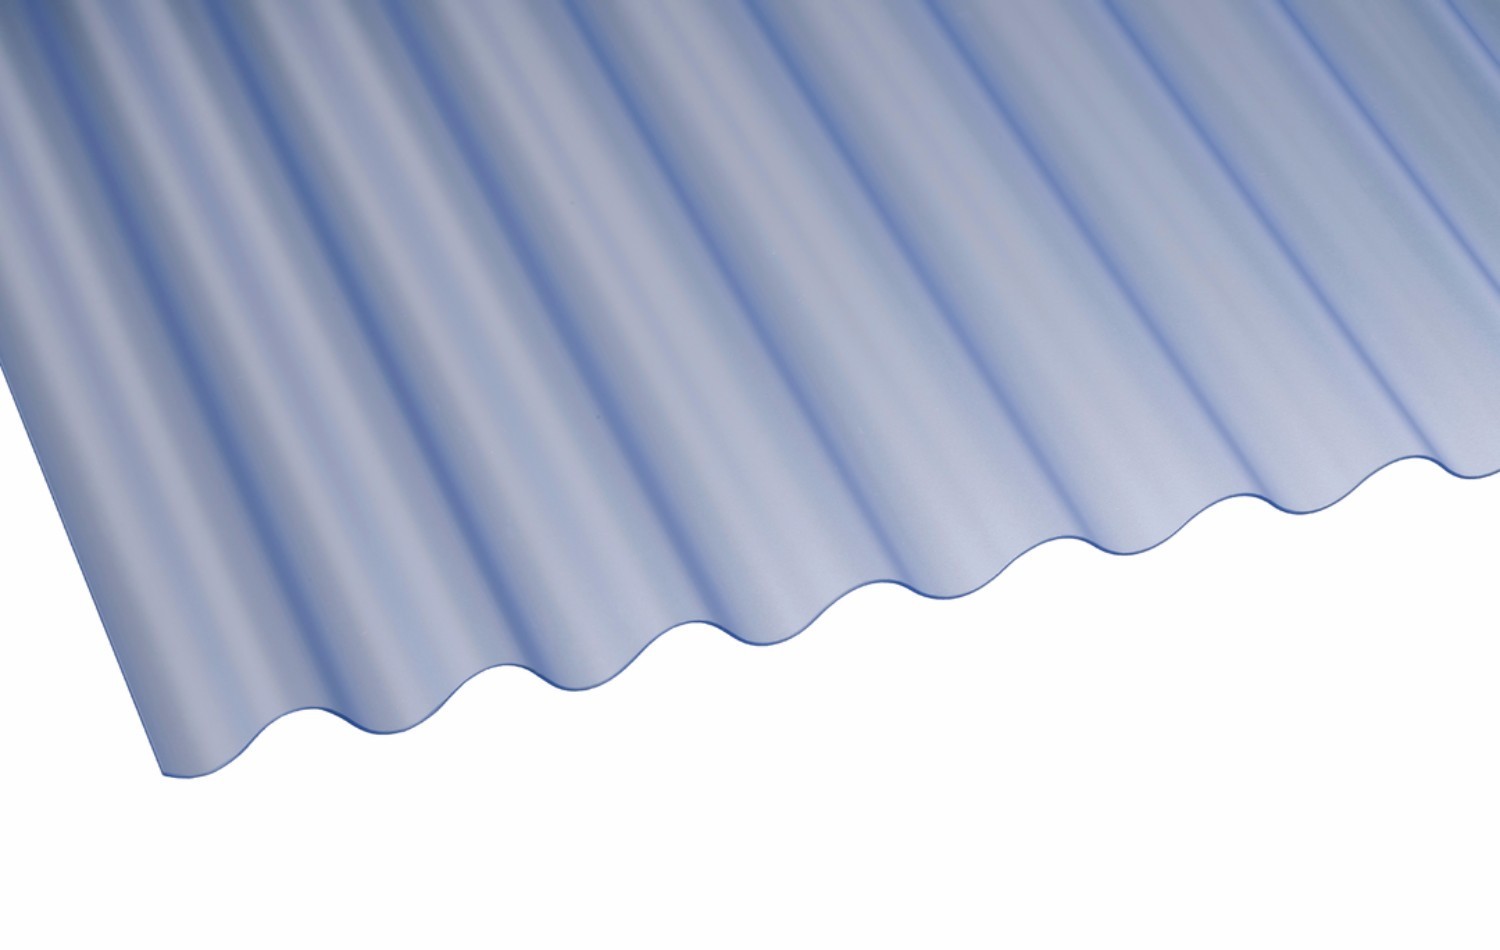 Corolux - Mini Corrugated PVC Roofing Sheet - Clear